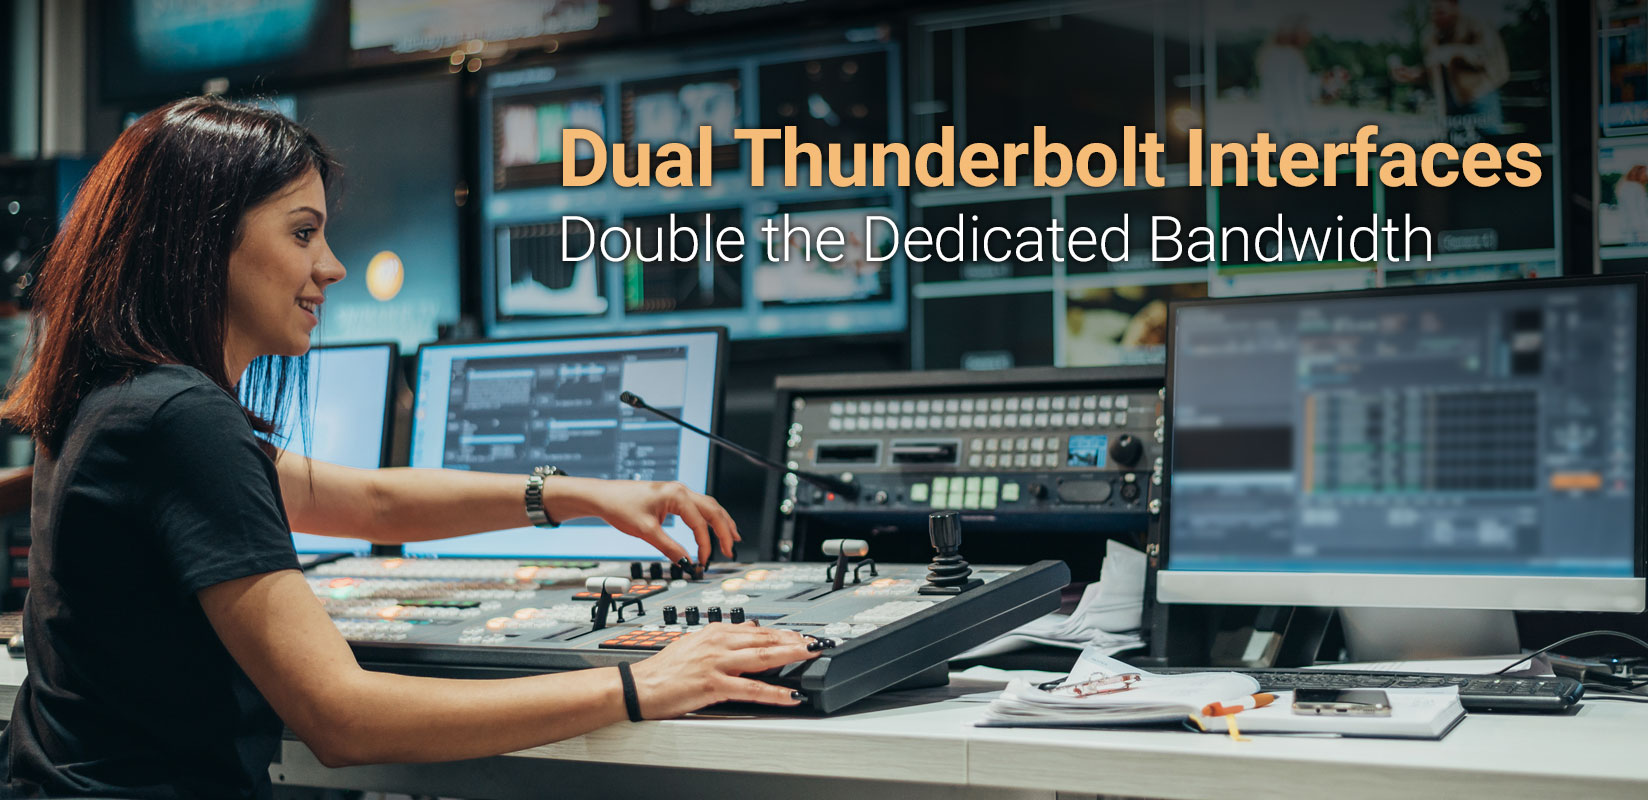 Dual Thunderbolt Interfaces - Double the Dedicated Bandwidth